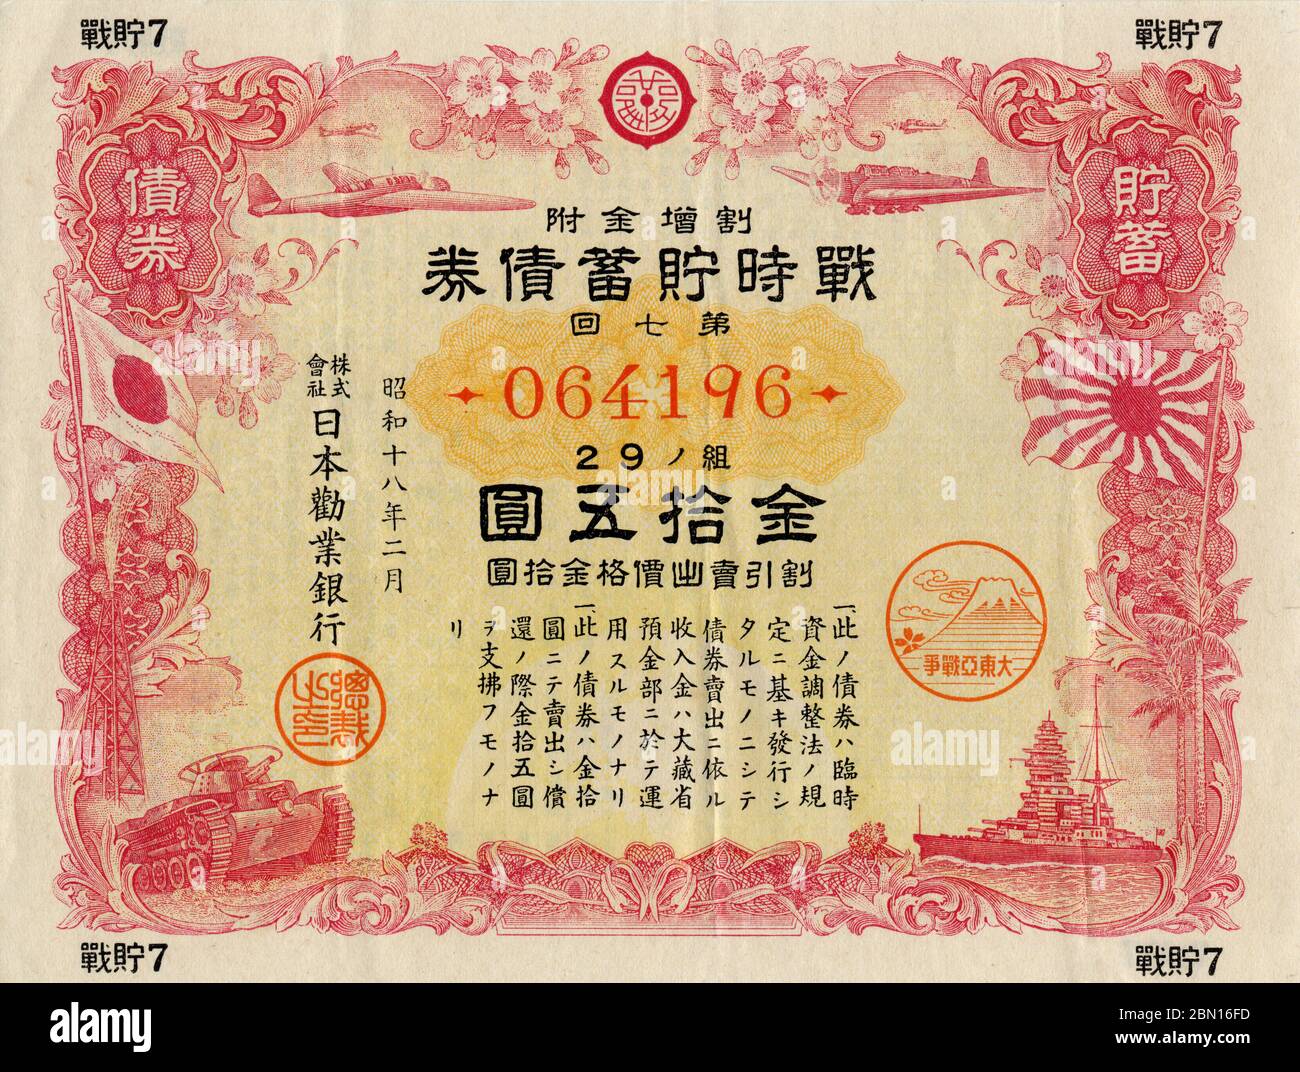 [ 1943 Japan - Japanese Pacific War Bond ] —   Pacific War Bond of 15 yen issued by the Imperial Government of Japan in 1943 (Showa 18), featuring Japanese WWII warplanes, a tank and a navy ship.  There were 21 releases. Release 2 through 7 all have the same so-called battle flags design. The 1st release and releases after the 7th show different designs.  In the 1930s and 1940s, 'voluntary' savings were so greatly encouraged to finance the Japanese war effort that by 1944 (Showa 19) Japanese households were saving an incredible 39.5% of disposable income.  20th century vintage bond. Stock Photo